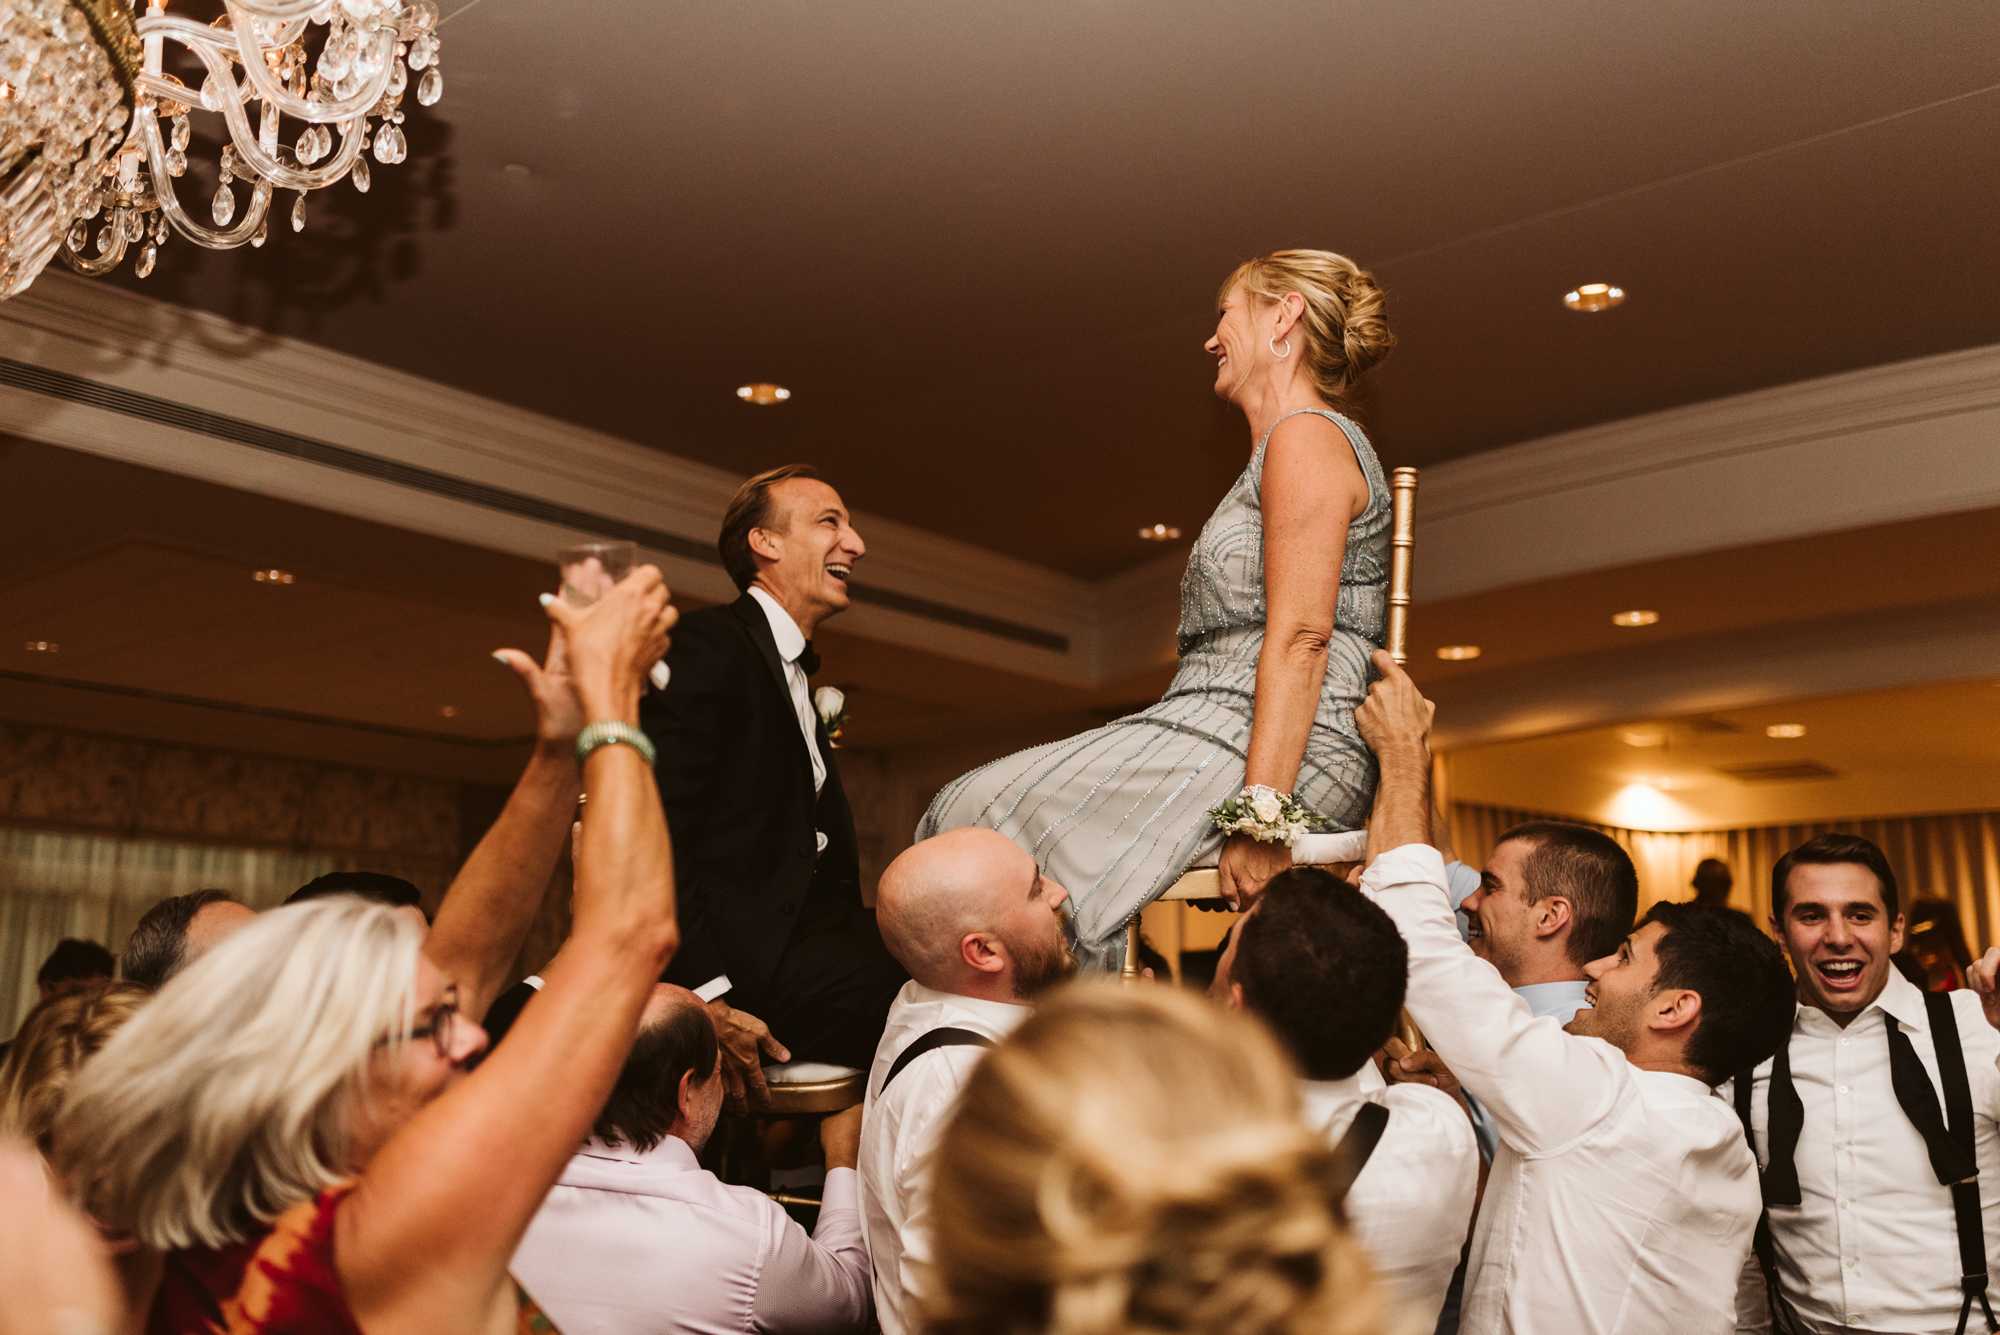 Elegant, Columbia Country Club, Chevy Chase Maryland, Baltimore Wedding Photographer, Classic, Traditional, Parents of Bride and Groom Doing the Hora at Jewish Wedding Reception